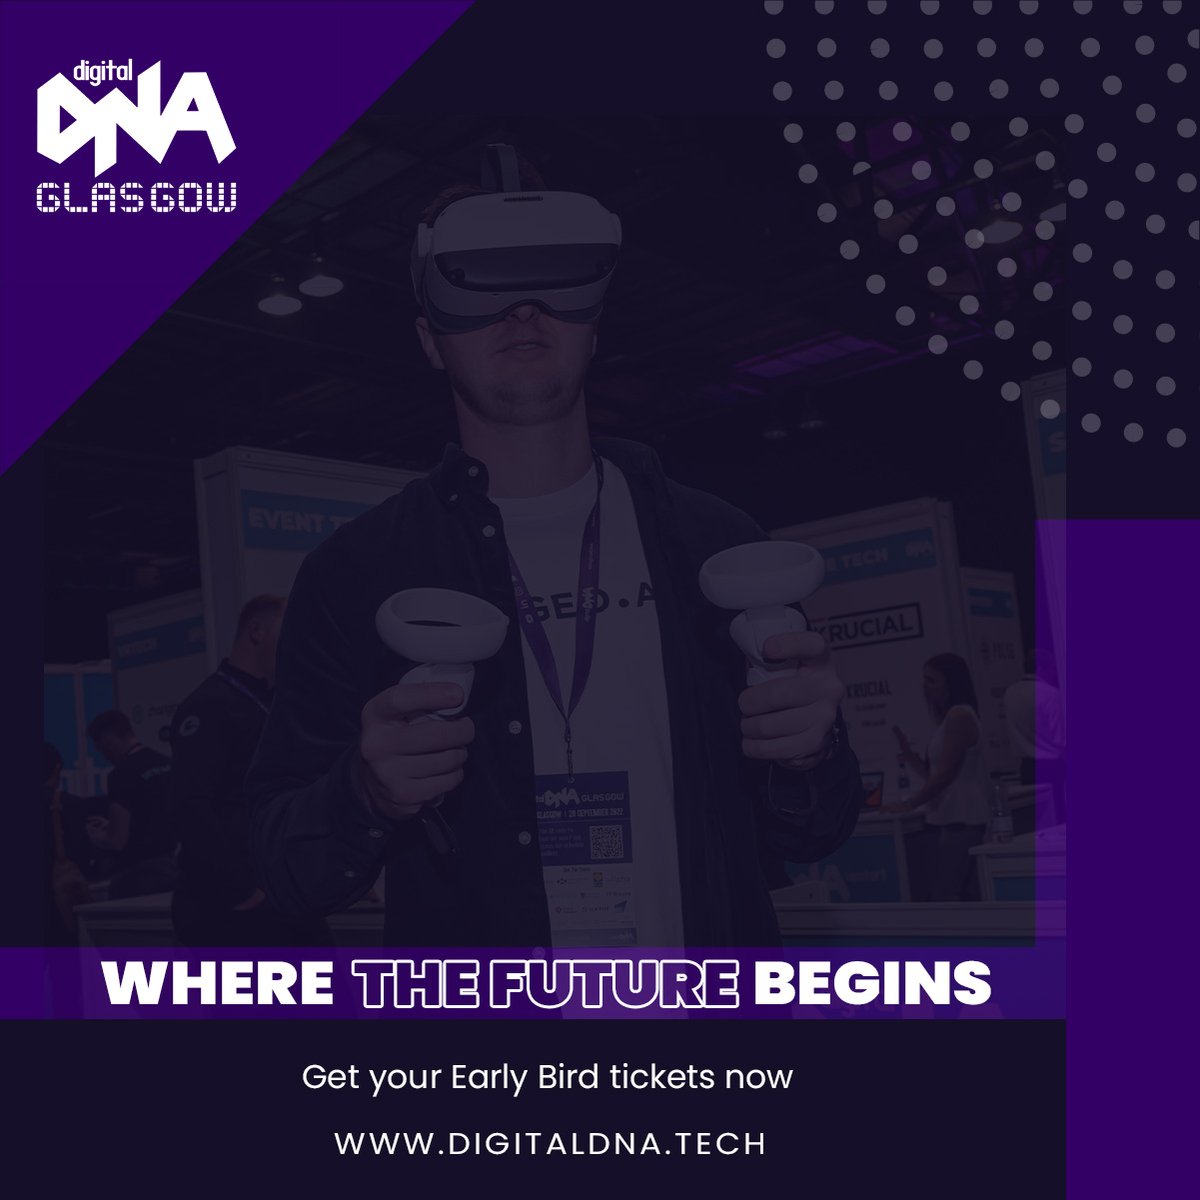 Join over 1,000 people from right across the tech ecosystem in Scotland, to explore what the future looks like ti.to/digital-dna/di… ?source=14AUG #digitaldna #scotland #glasgow #technology